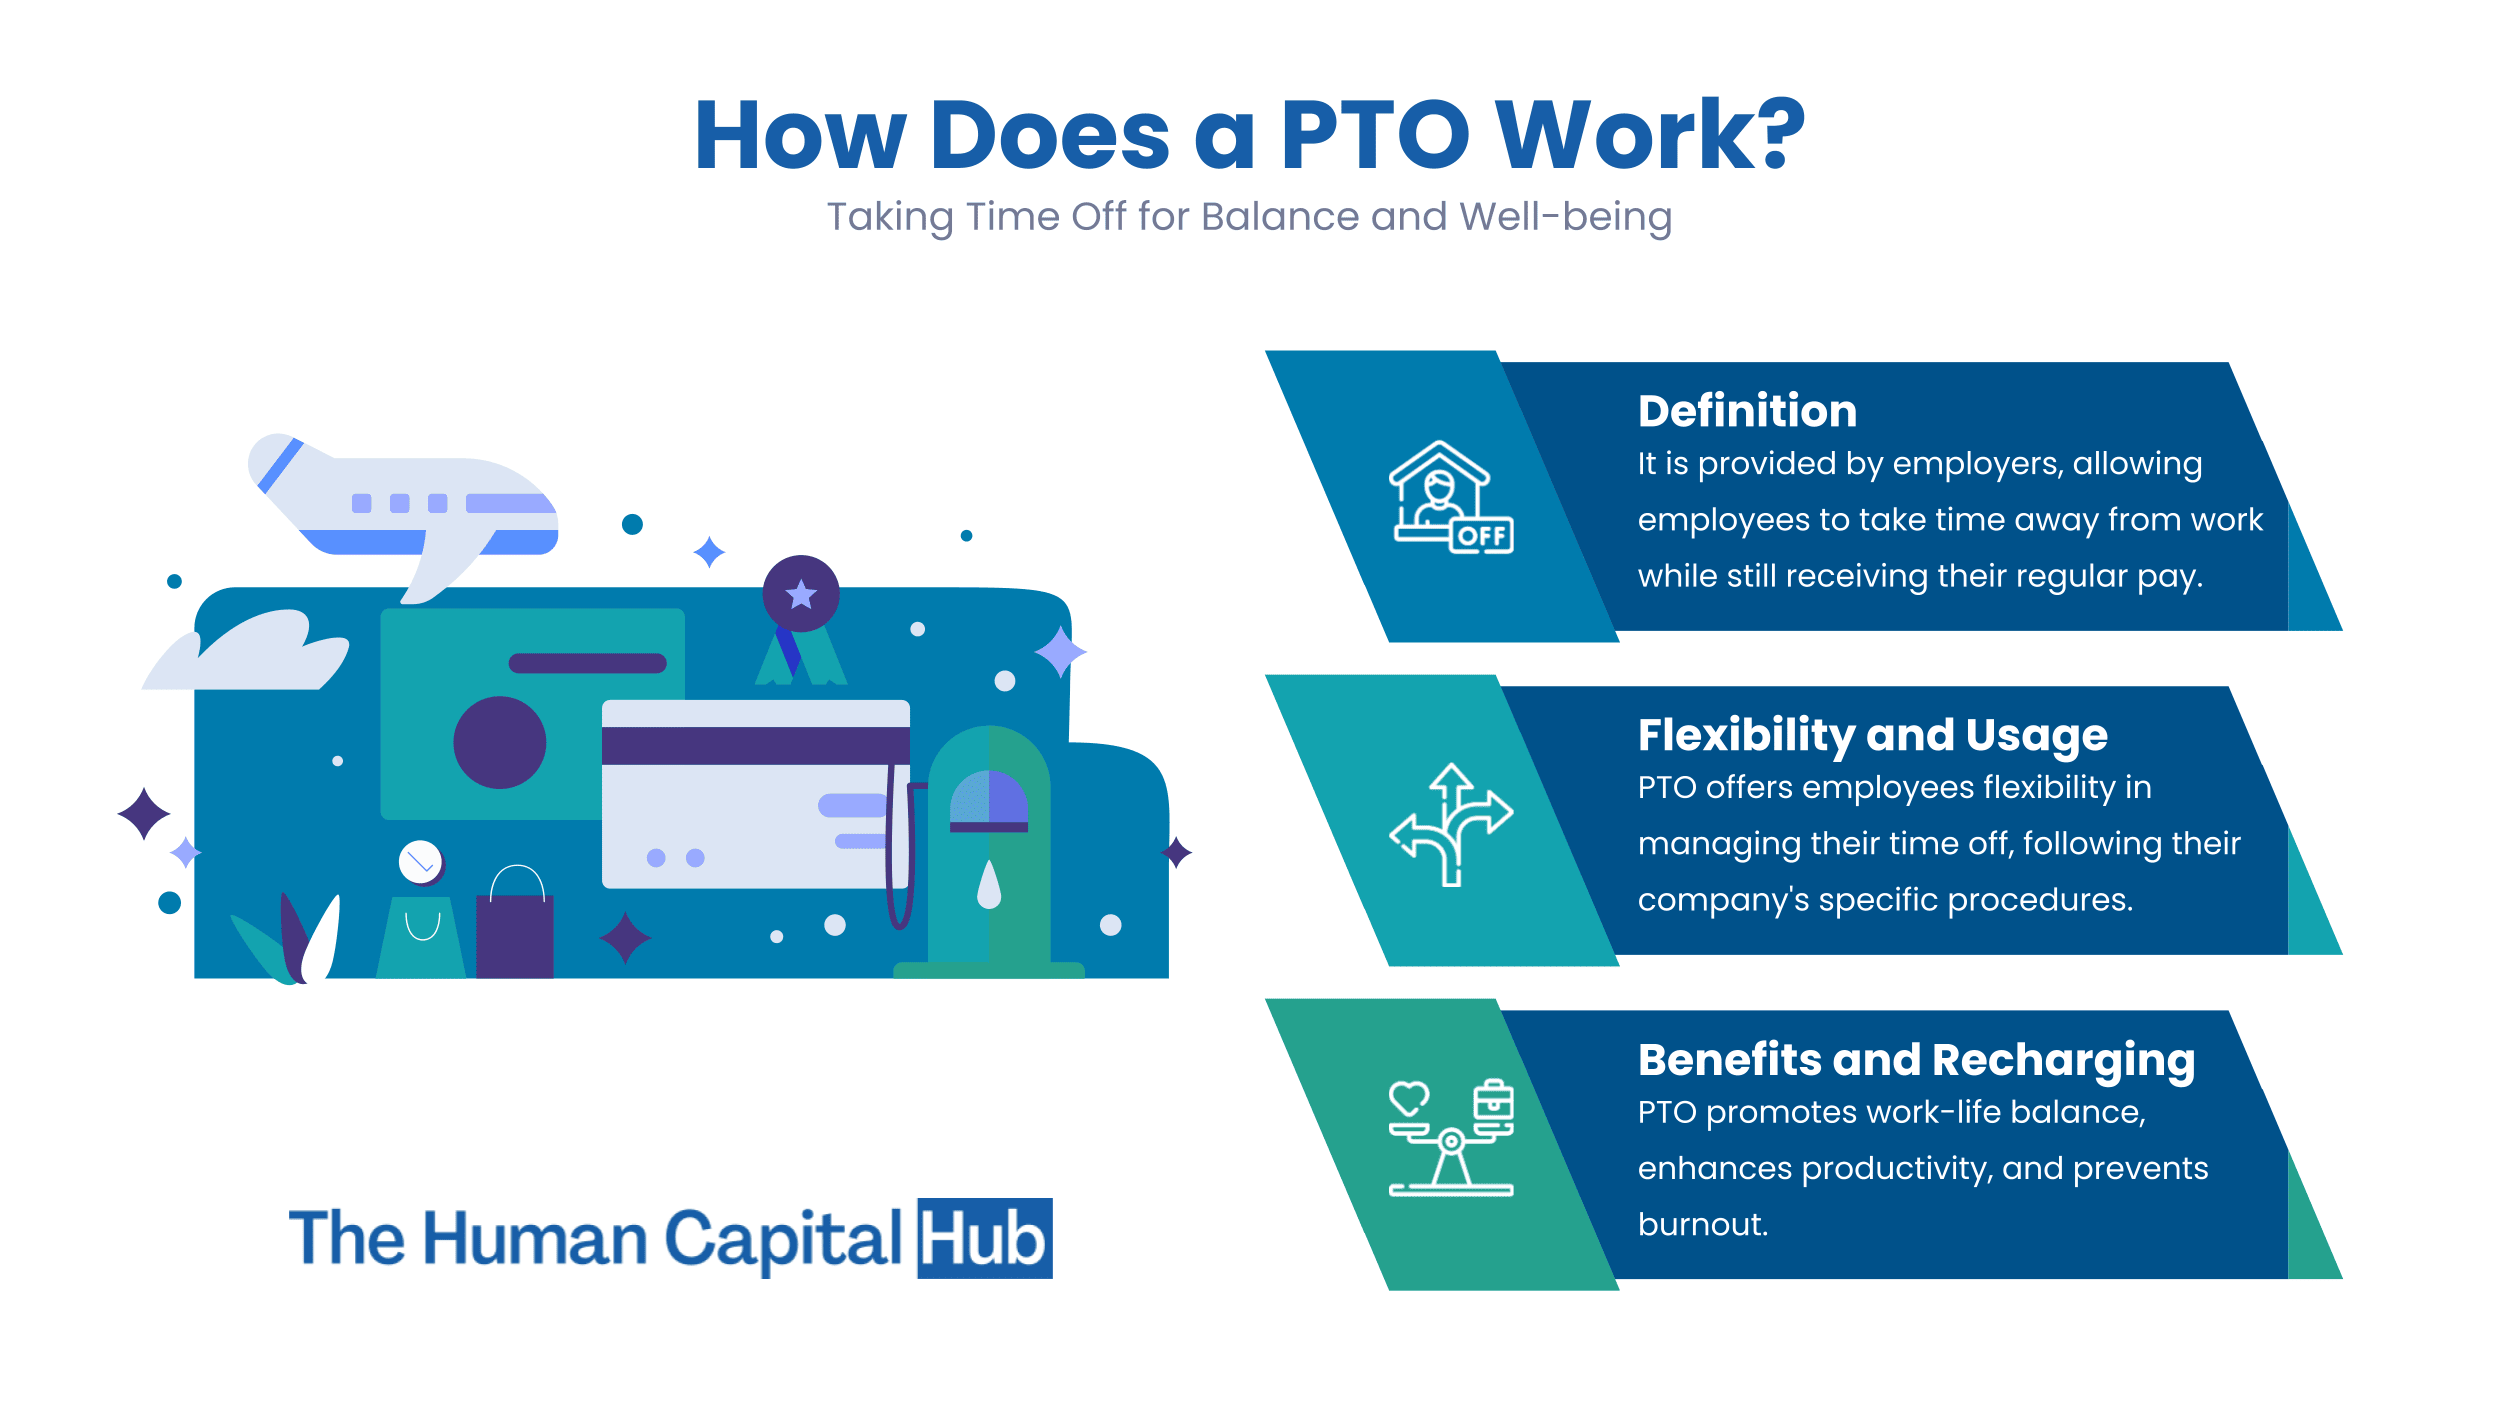 How Does A PTO Work?